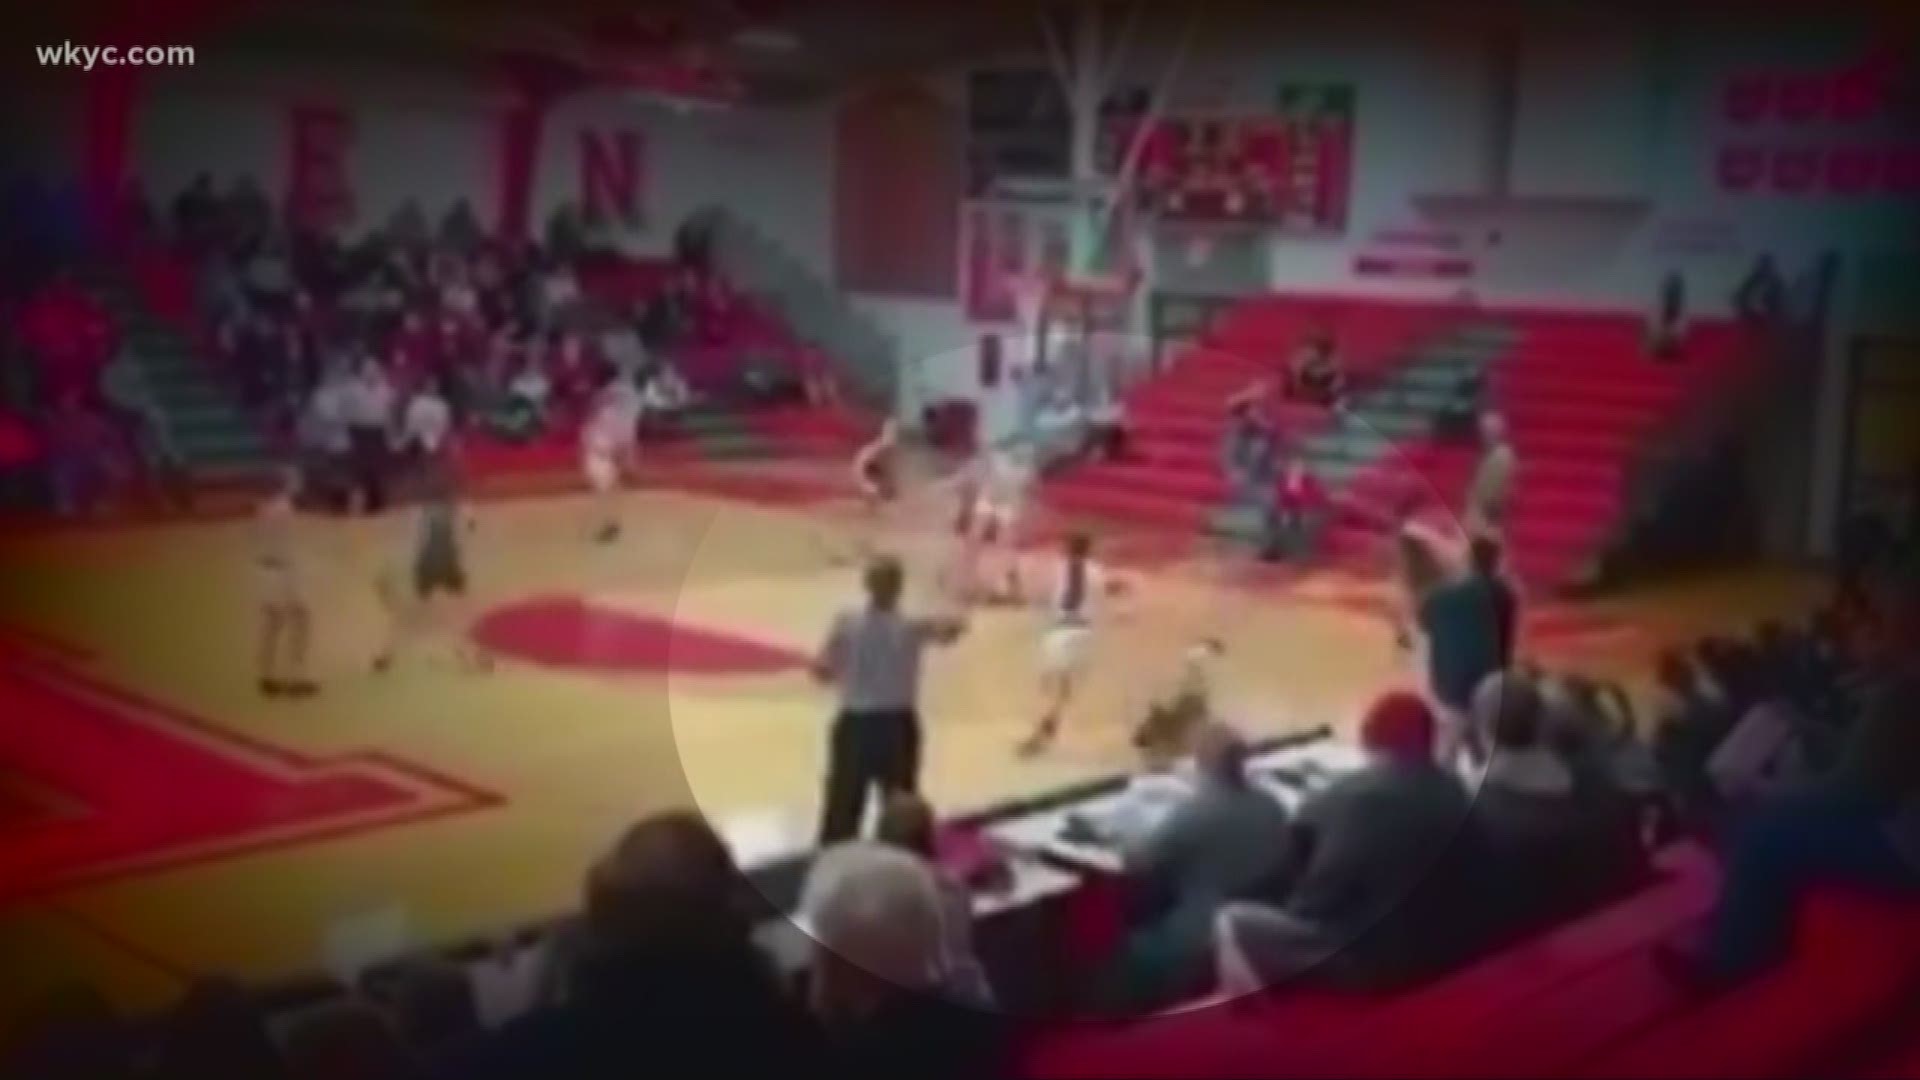 Norwalk basketball player slammed to the ground during weekend game